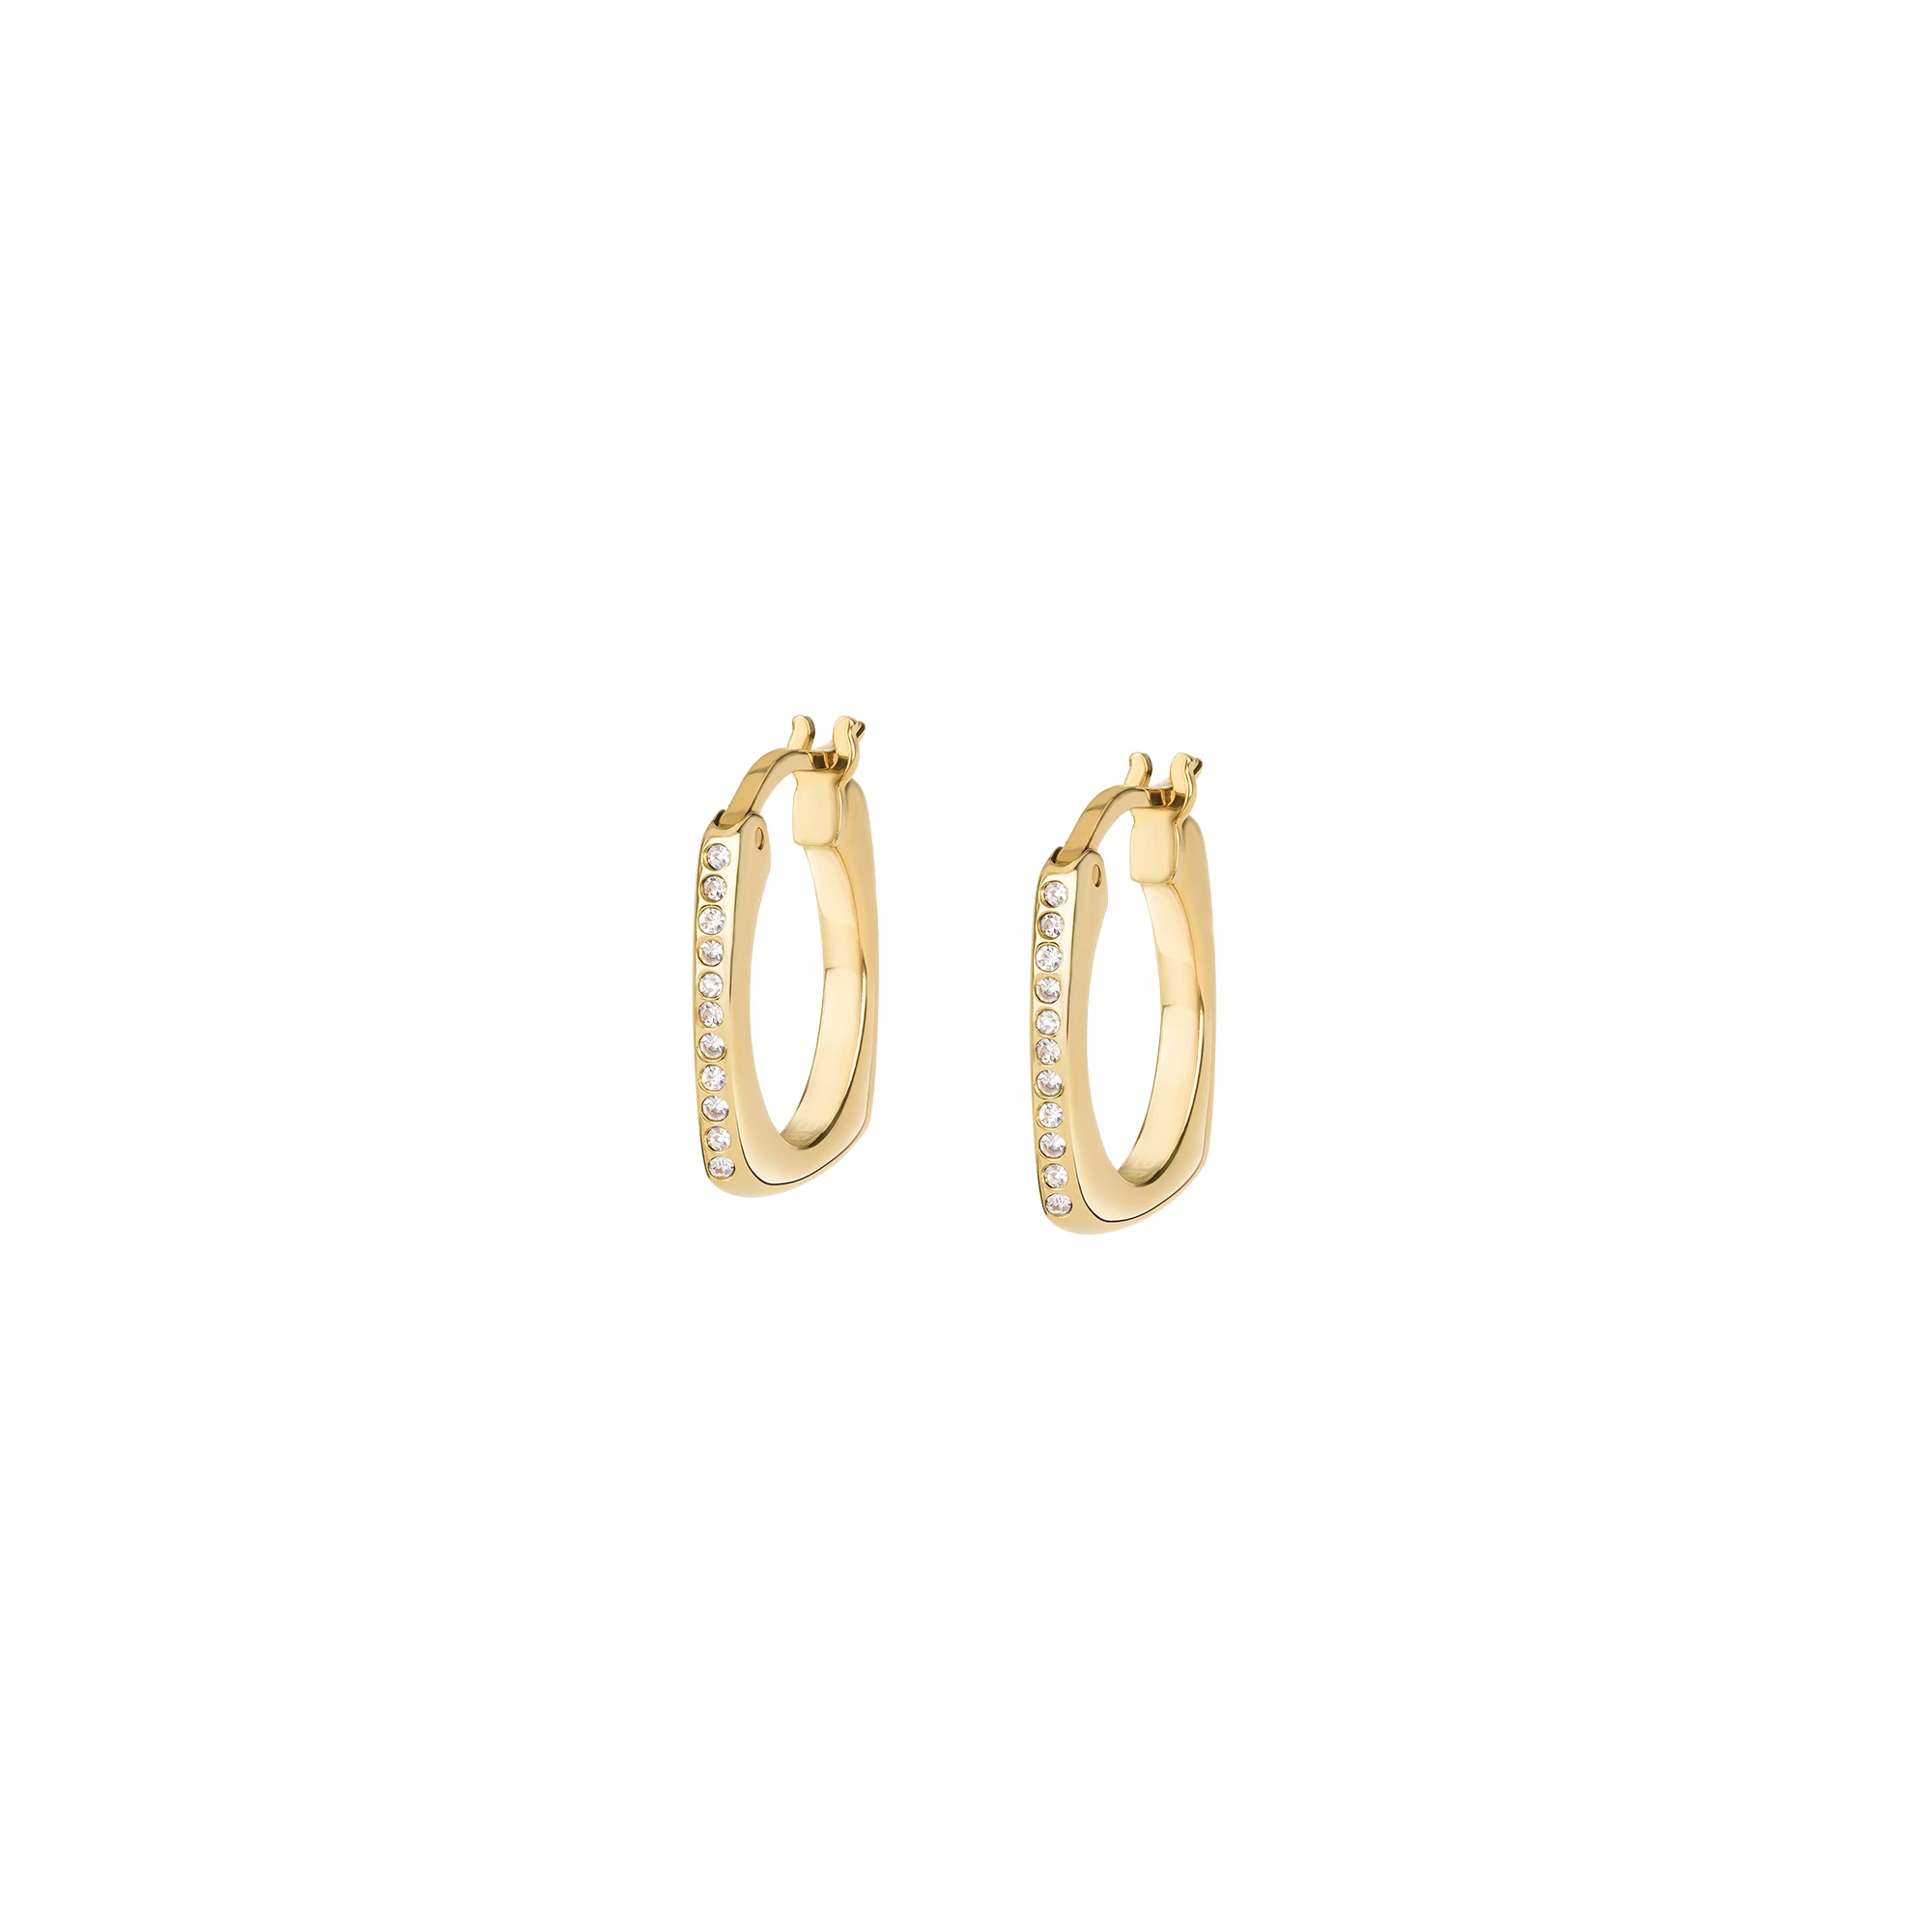 NEW TETRA - IP GOLD STEEL EARRINGS WITH CRYSTALS - 1 - TJ3158 | Breil